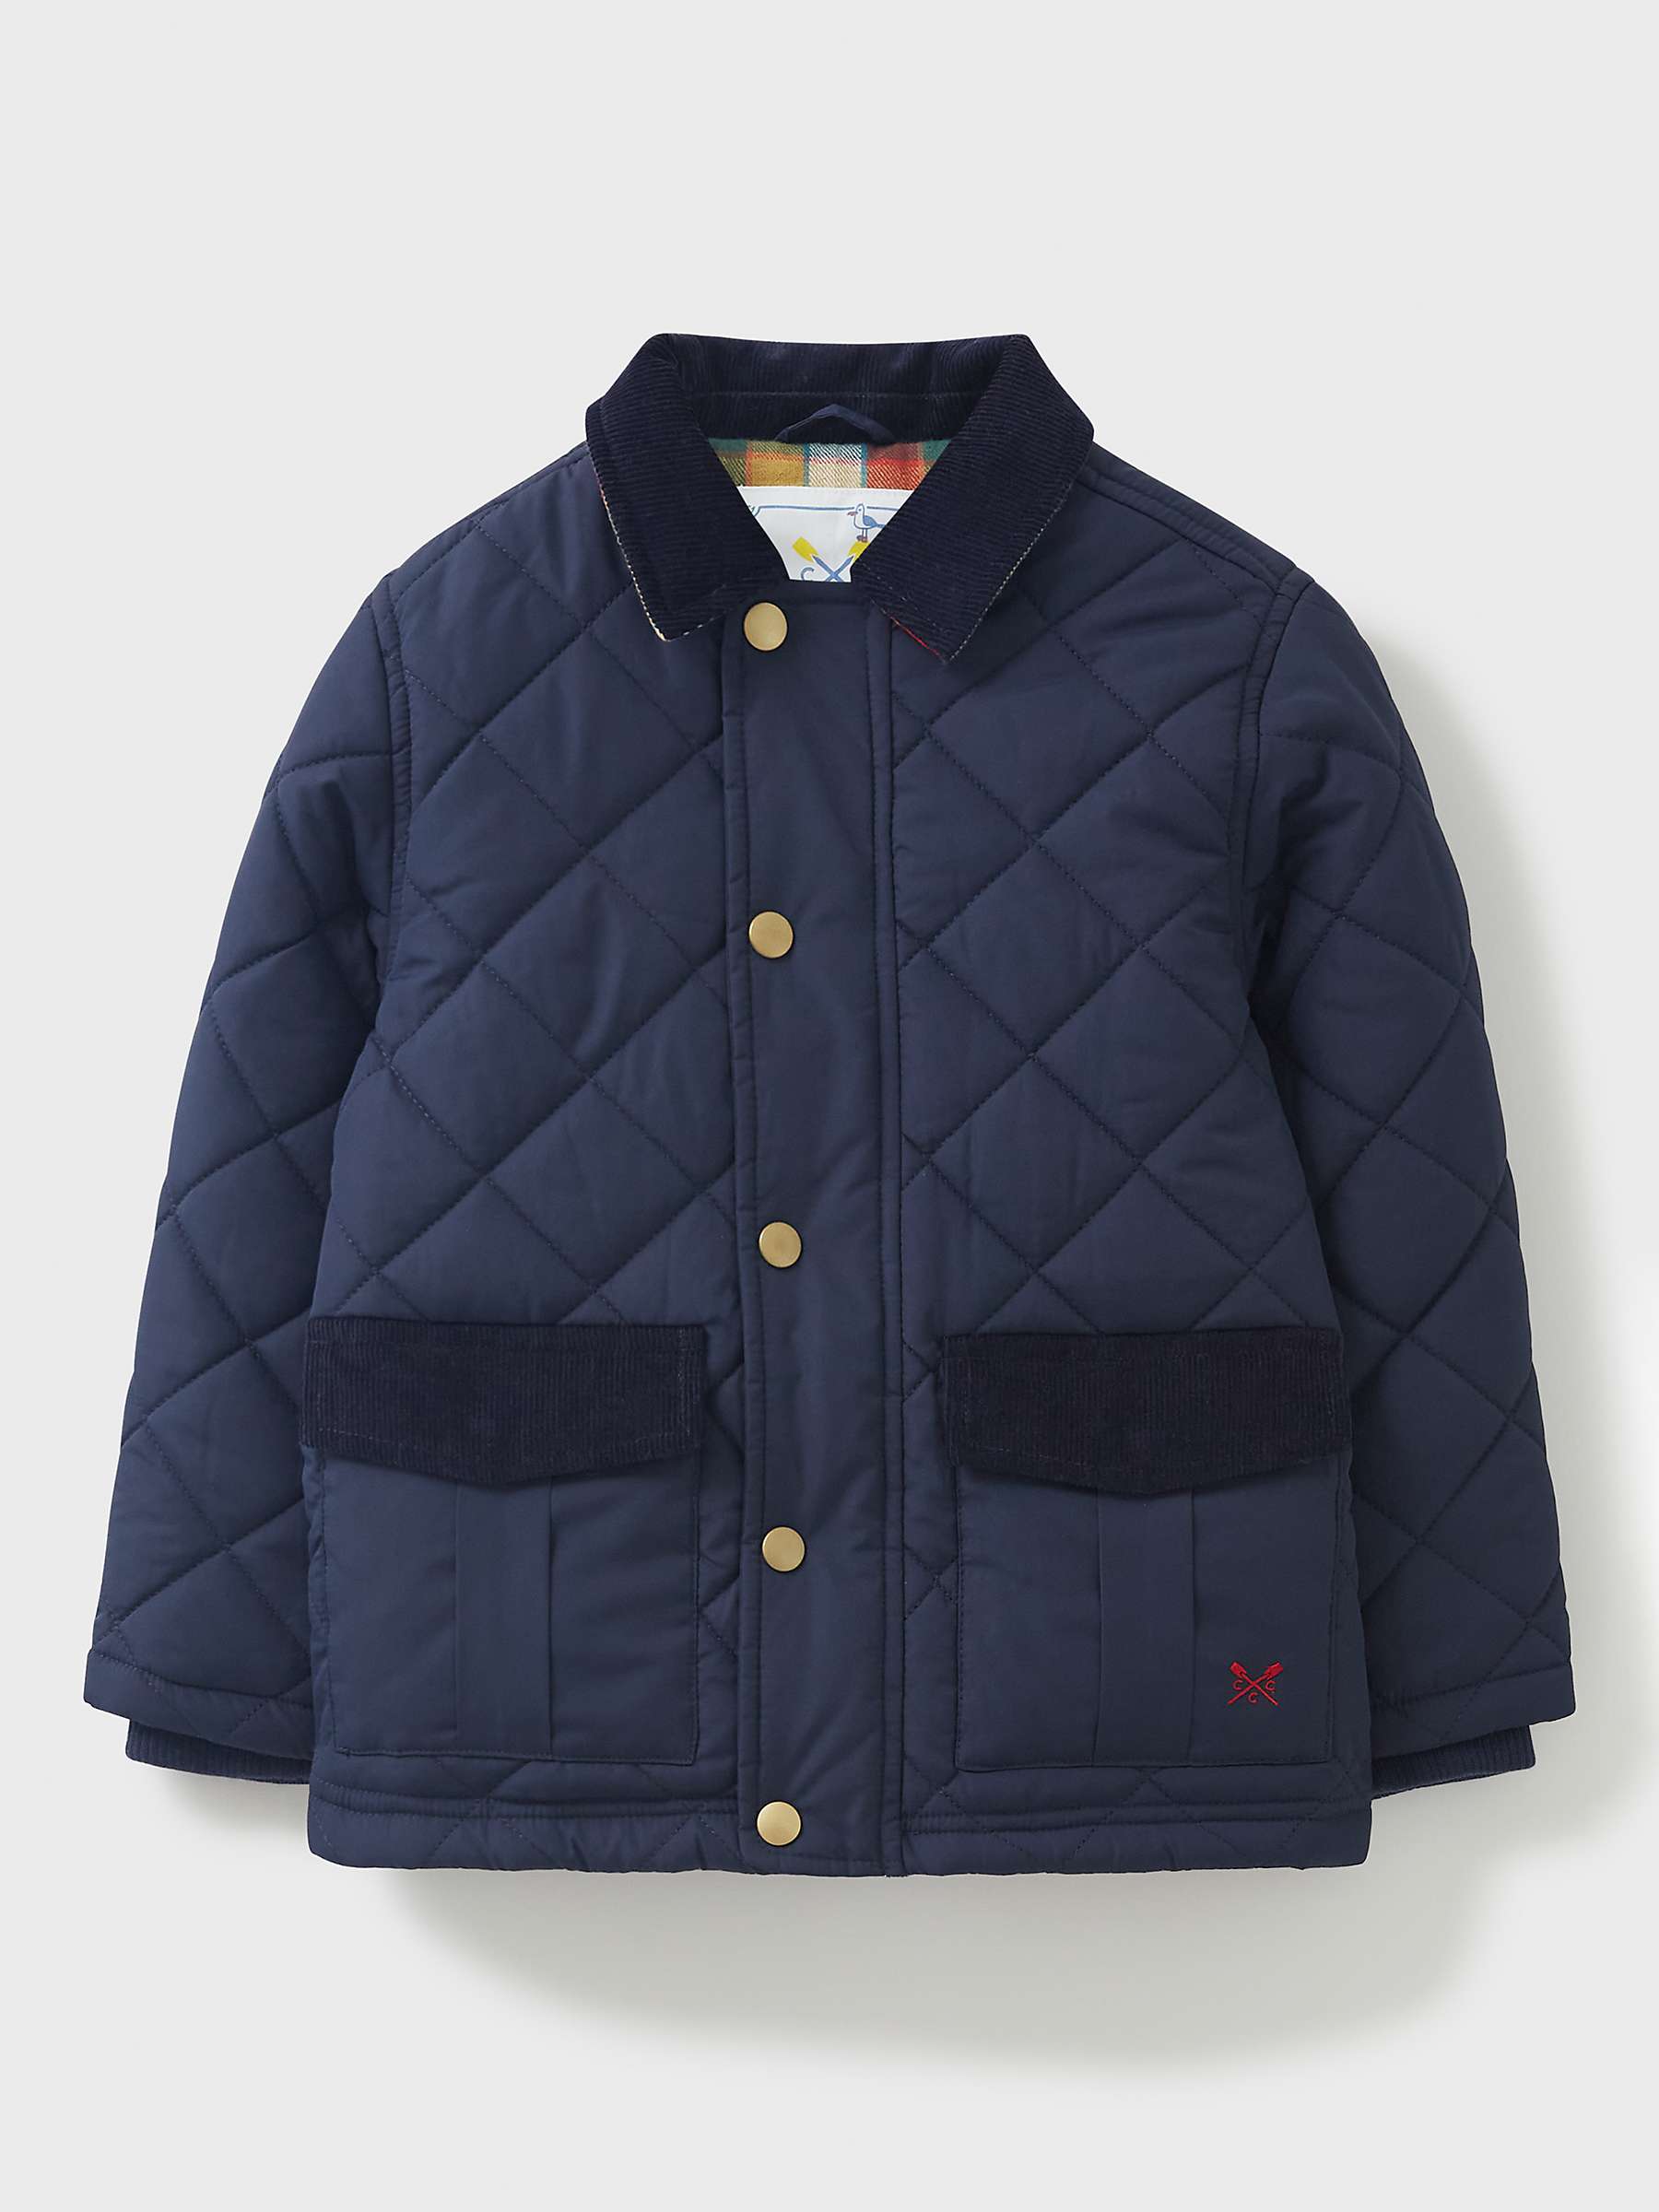 Crew Clothing Kids' Quilted Coat, Navy Blue at John Lewis & Partners